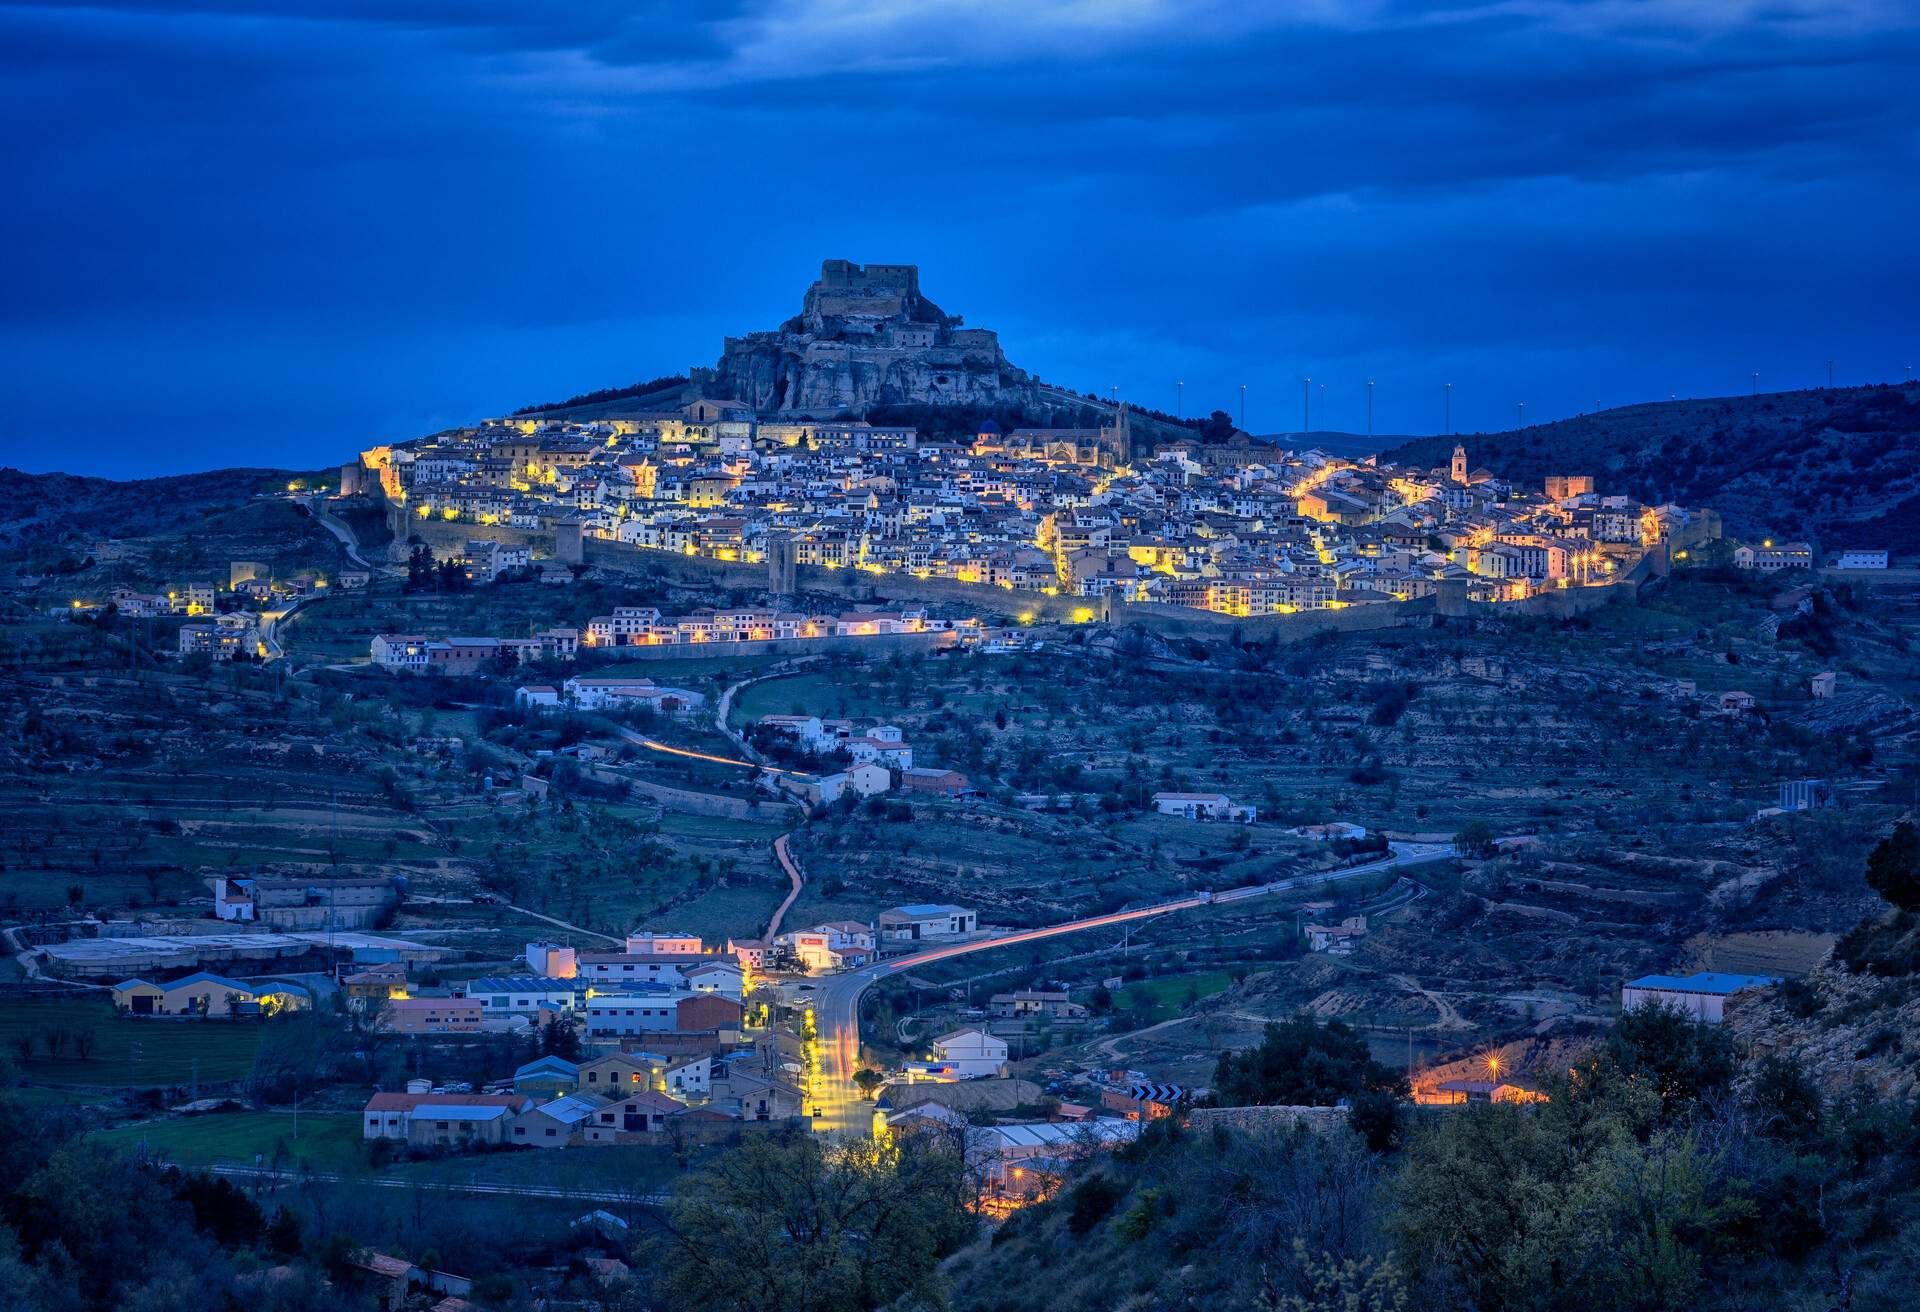 Morella, city of Castellon province bordering on Teruel and Tarragona, appears before visitors eyes.